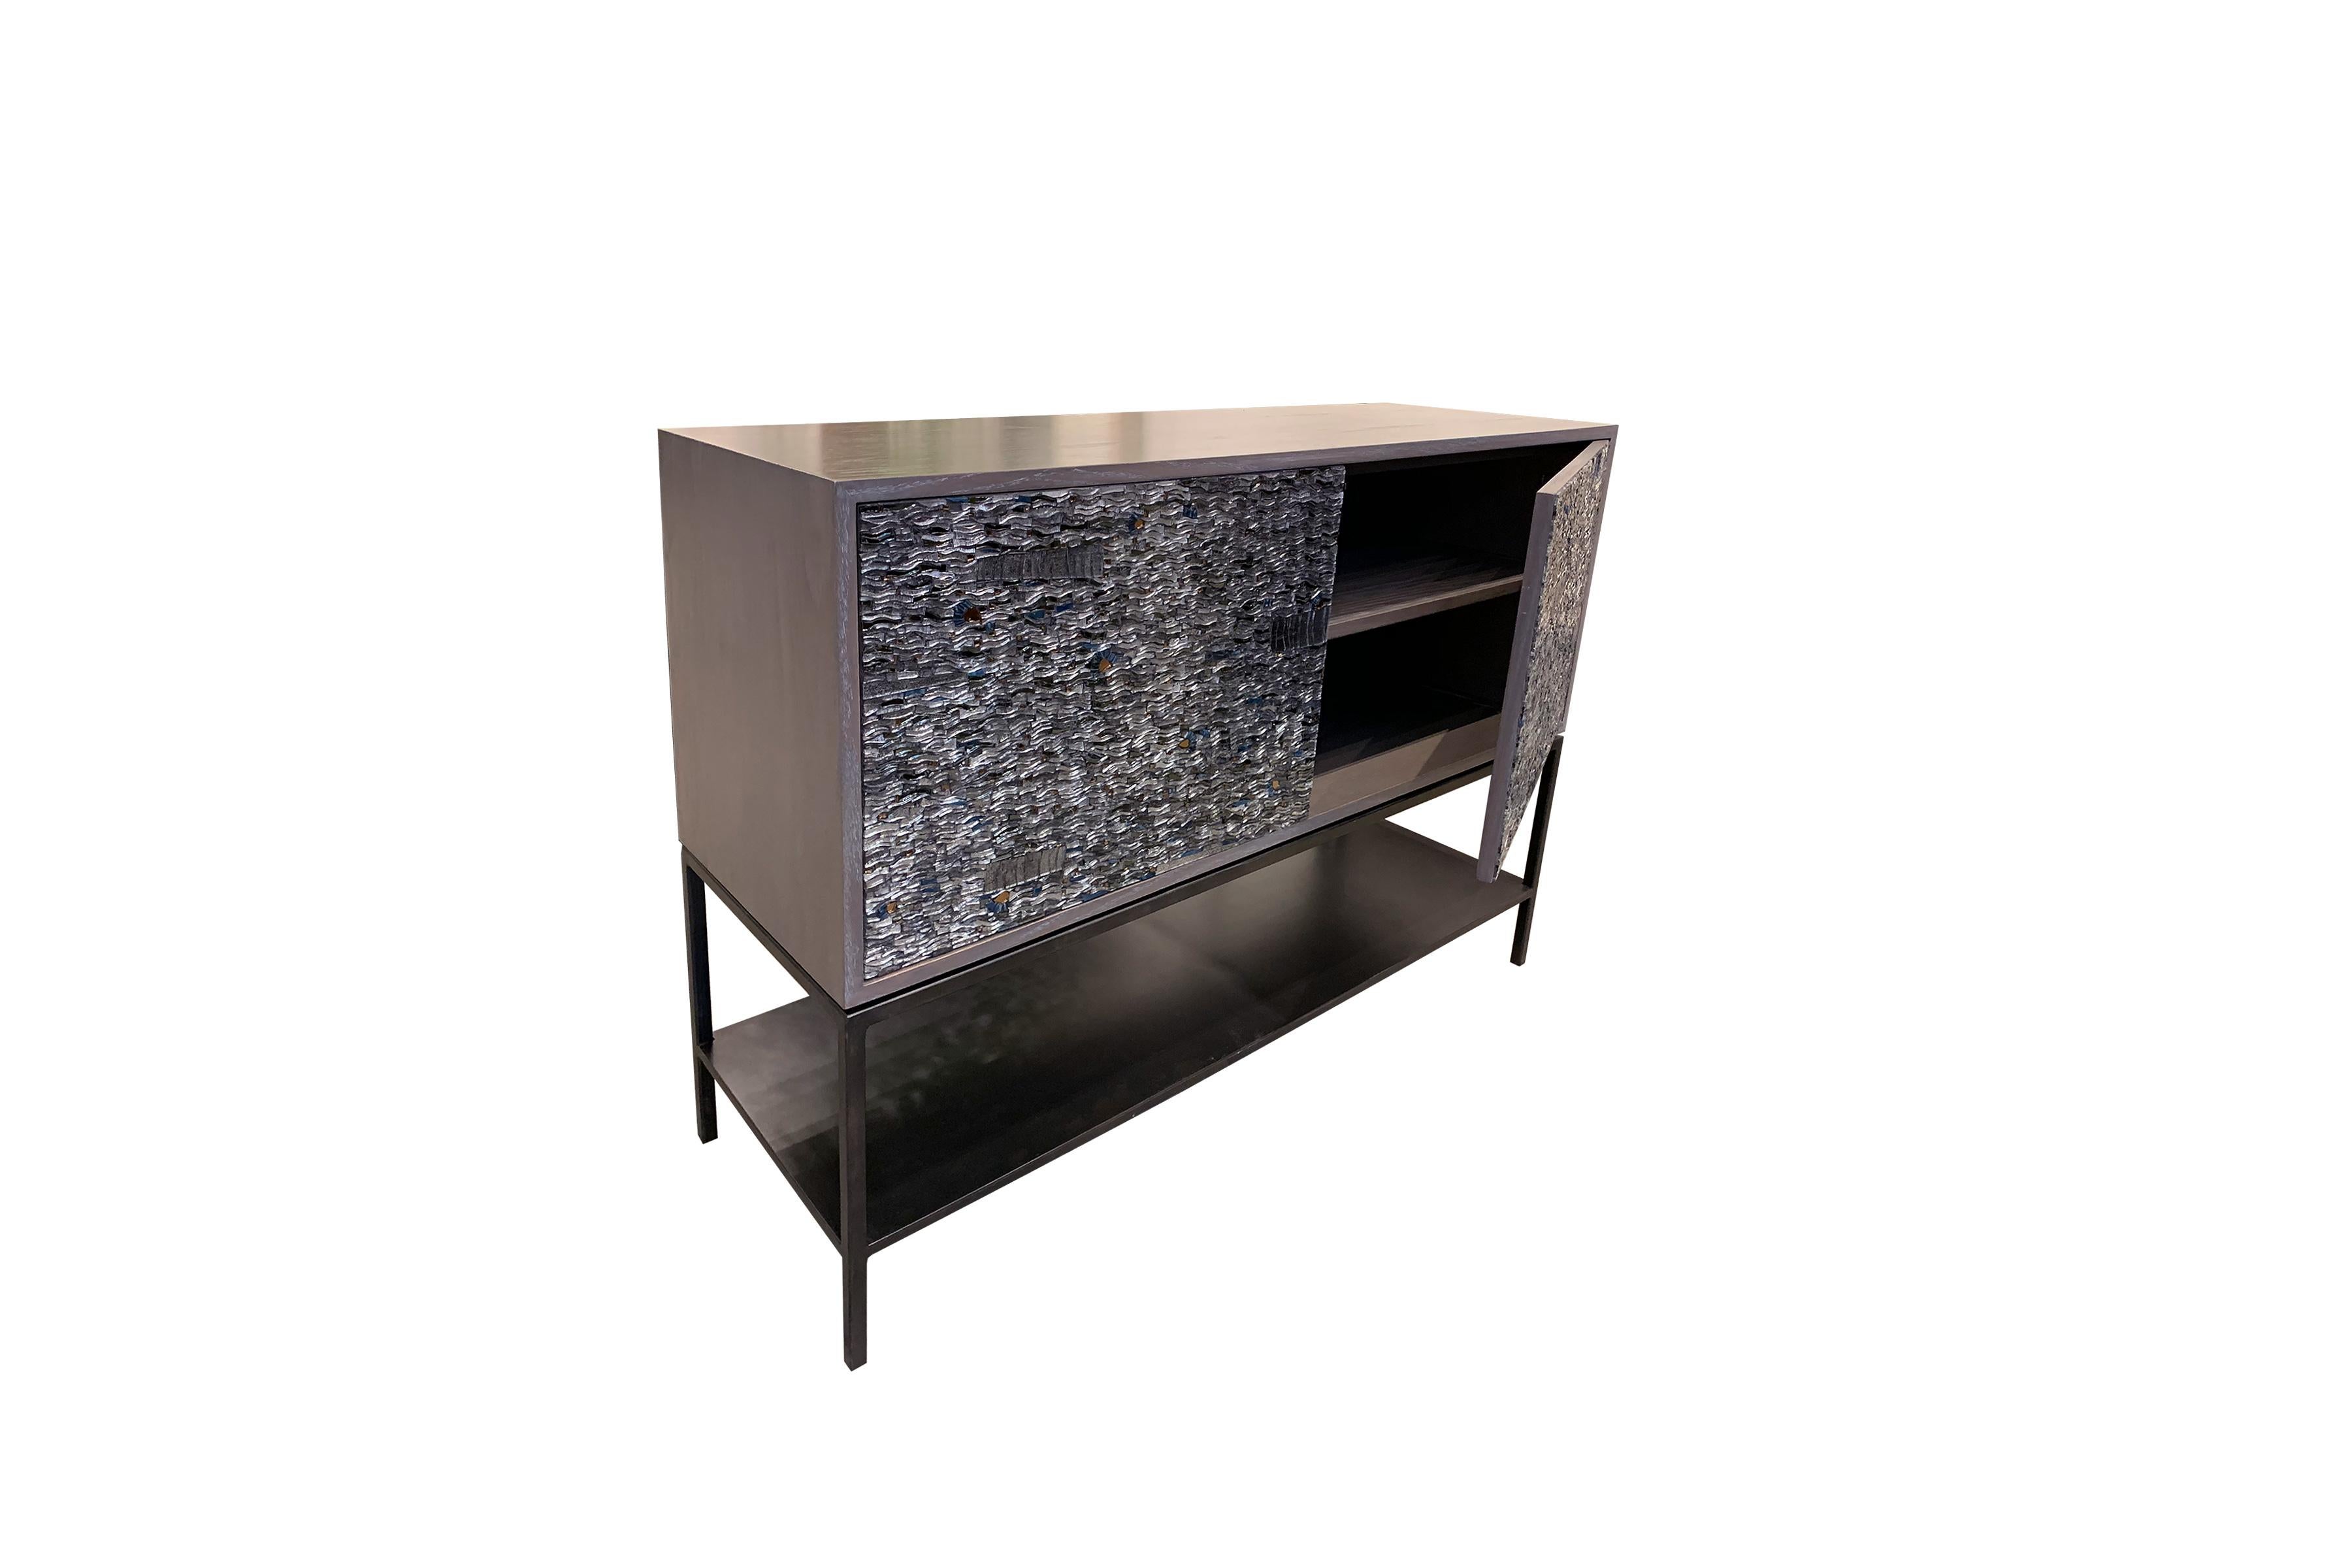 The Ravenna cabinet by Ercole Home has a 2-door front, with metal base in natural steel finish. The metal shelf is 5” H off the floor.
Handcut glass mosaic in grey mirror, pewter, antique pewter, silver, antique silver, fume, notte and bronze